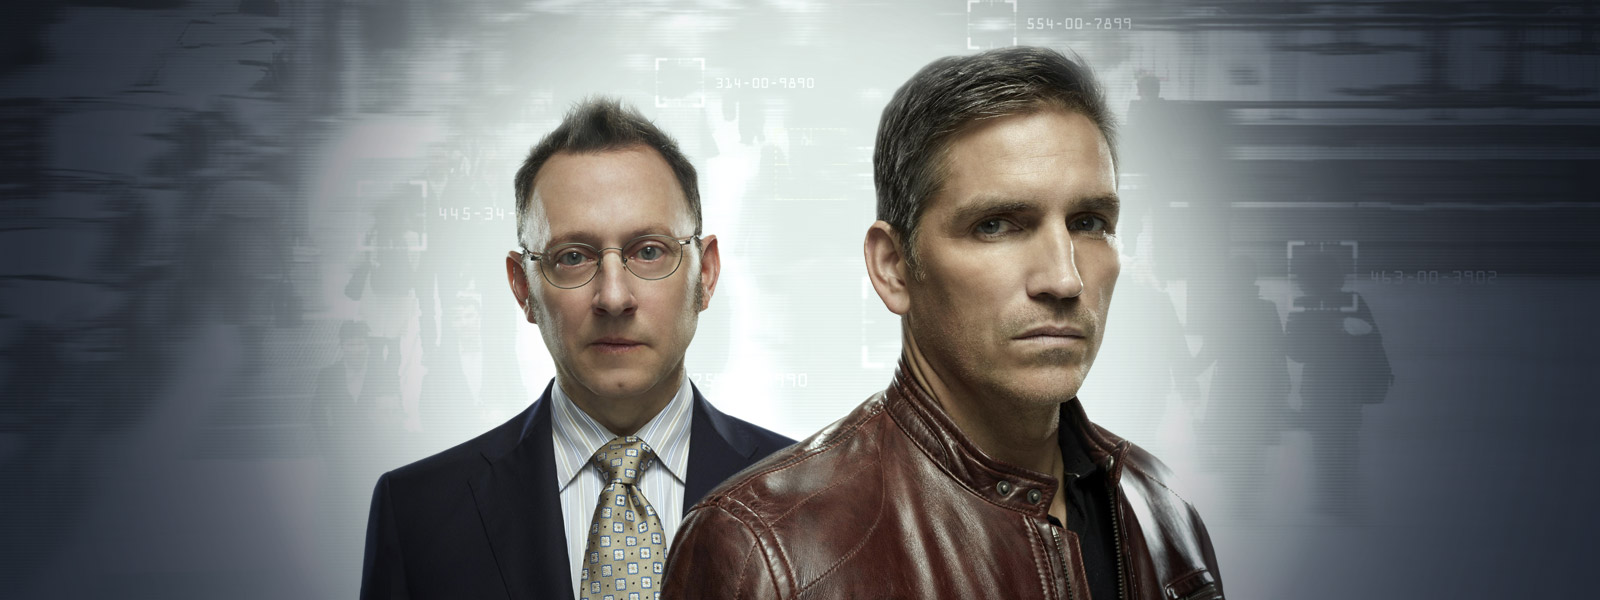 Review: Person of Interest – “End Game”